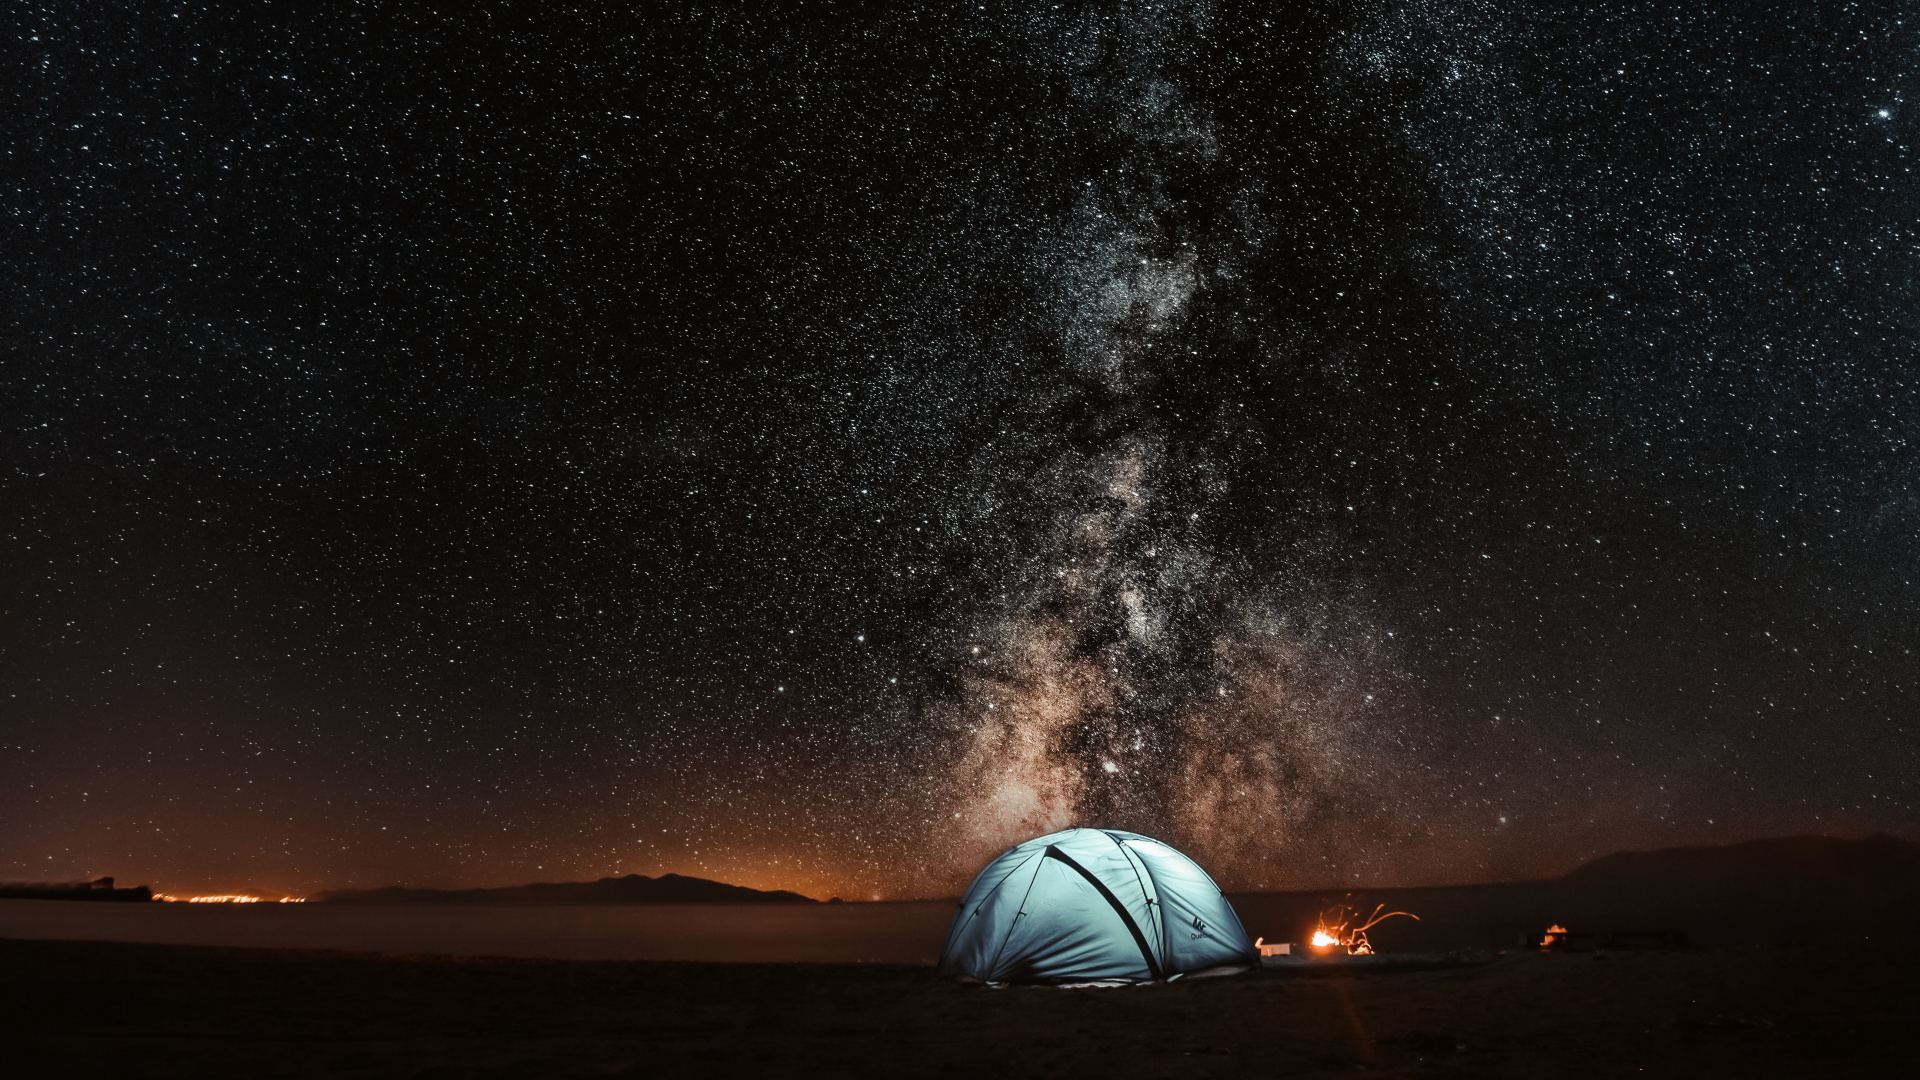 White Dome Tent Under Starry Night. Wallpaper in 1920x1080 Resolution